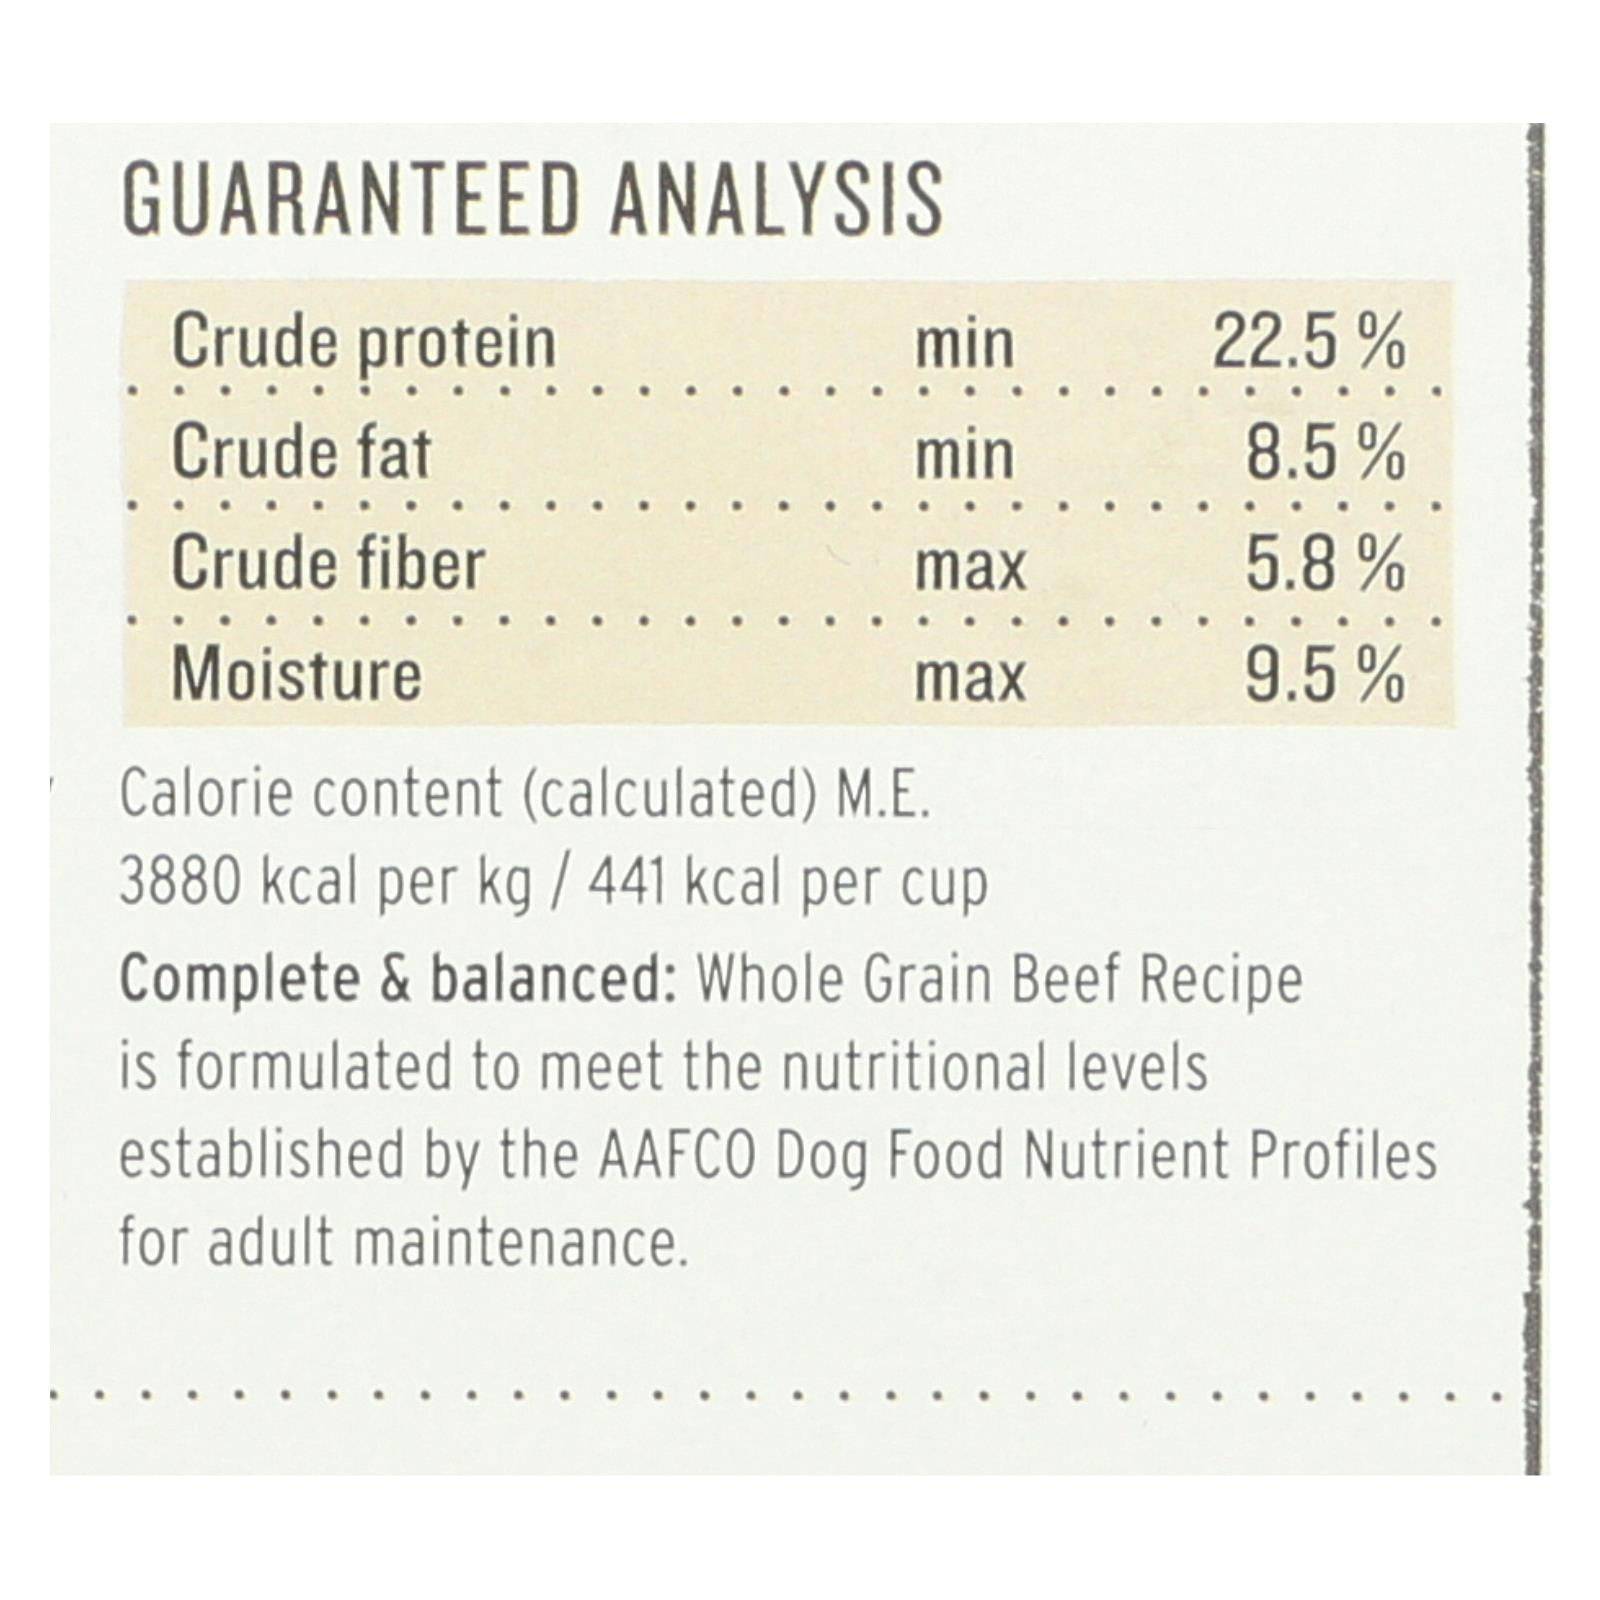 The Honest Kitchen - Dog Food - Whole Grain Beef Recipe - Case Of 6 - 2 Lb. | OnlyNaturals.us